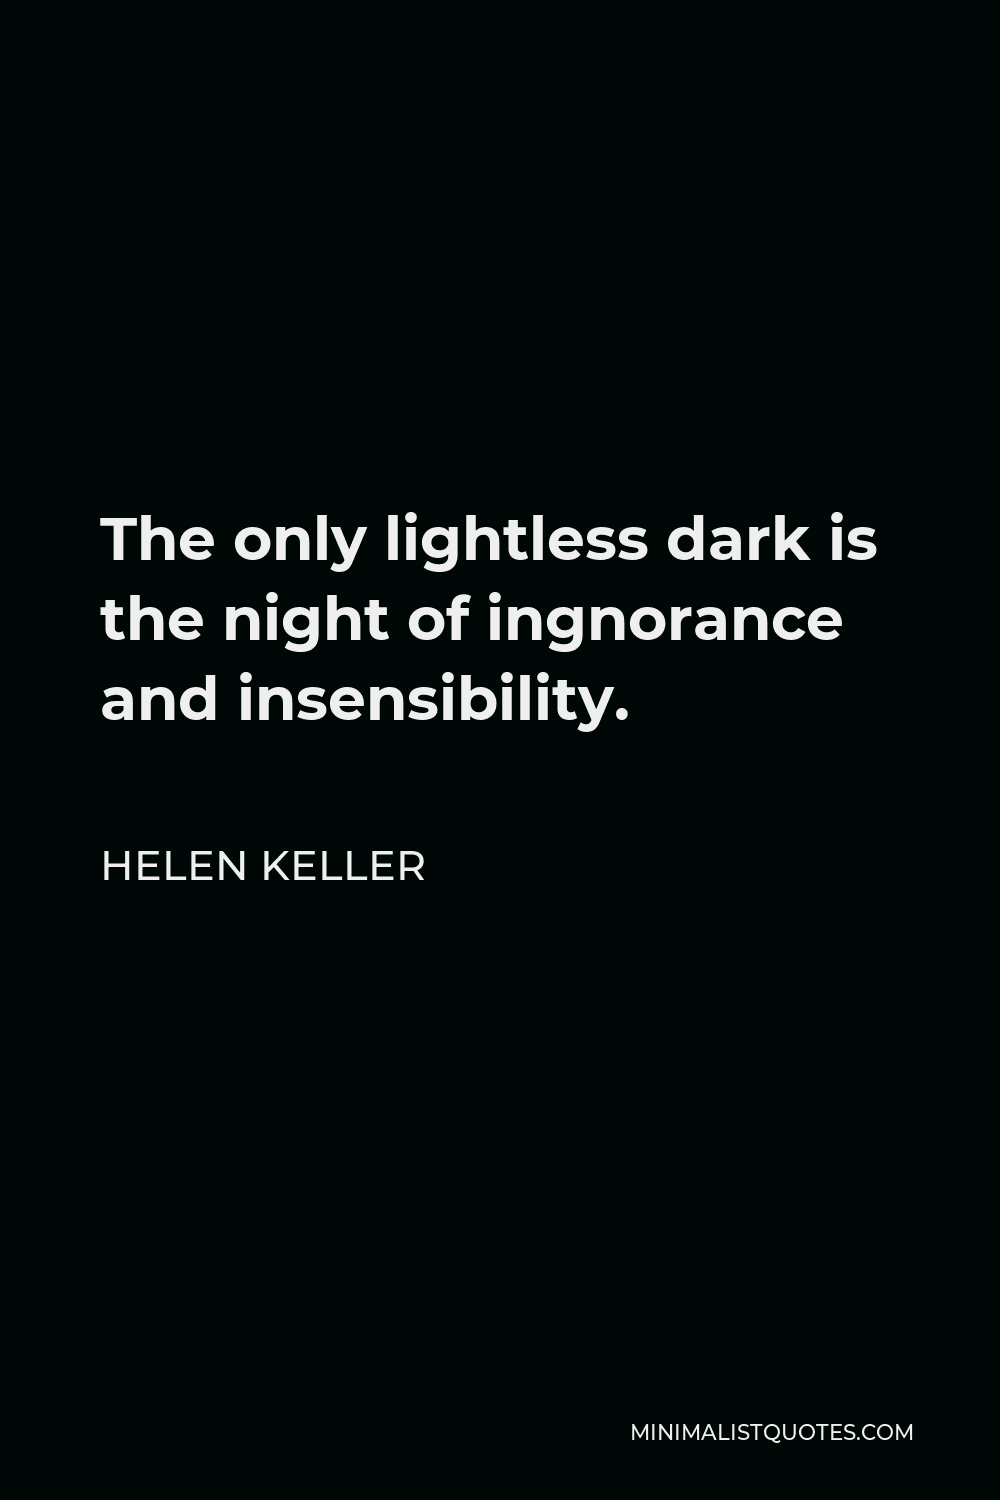 Helen Keller Quote - The only lightless dark is the night of ingnorance and insensibility.